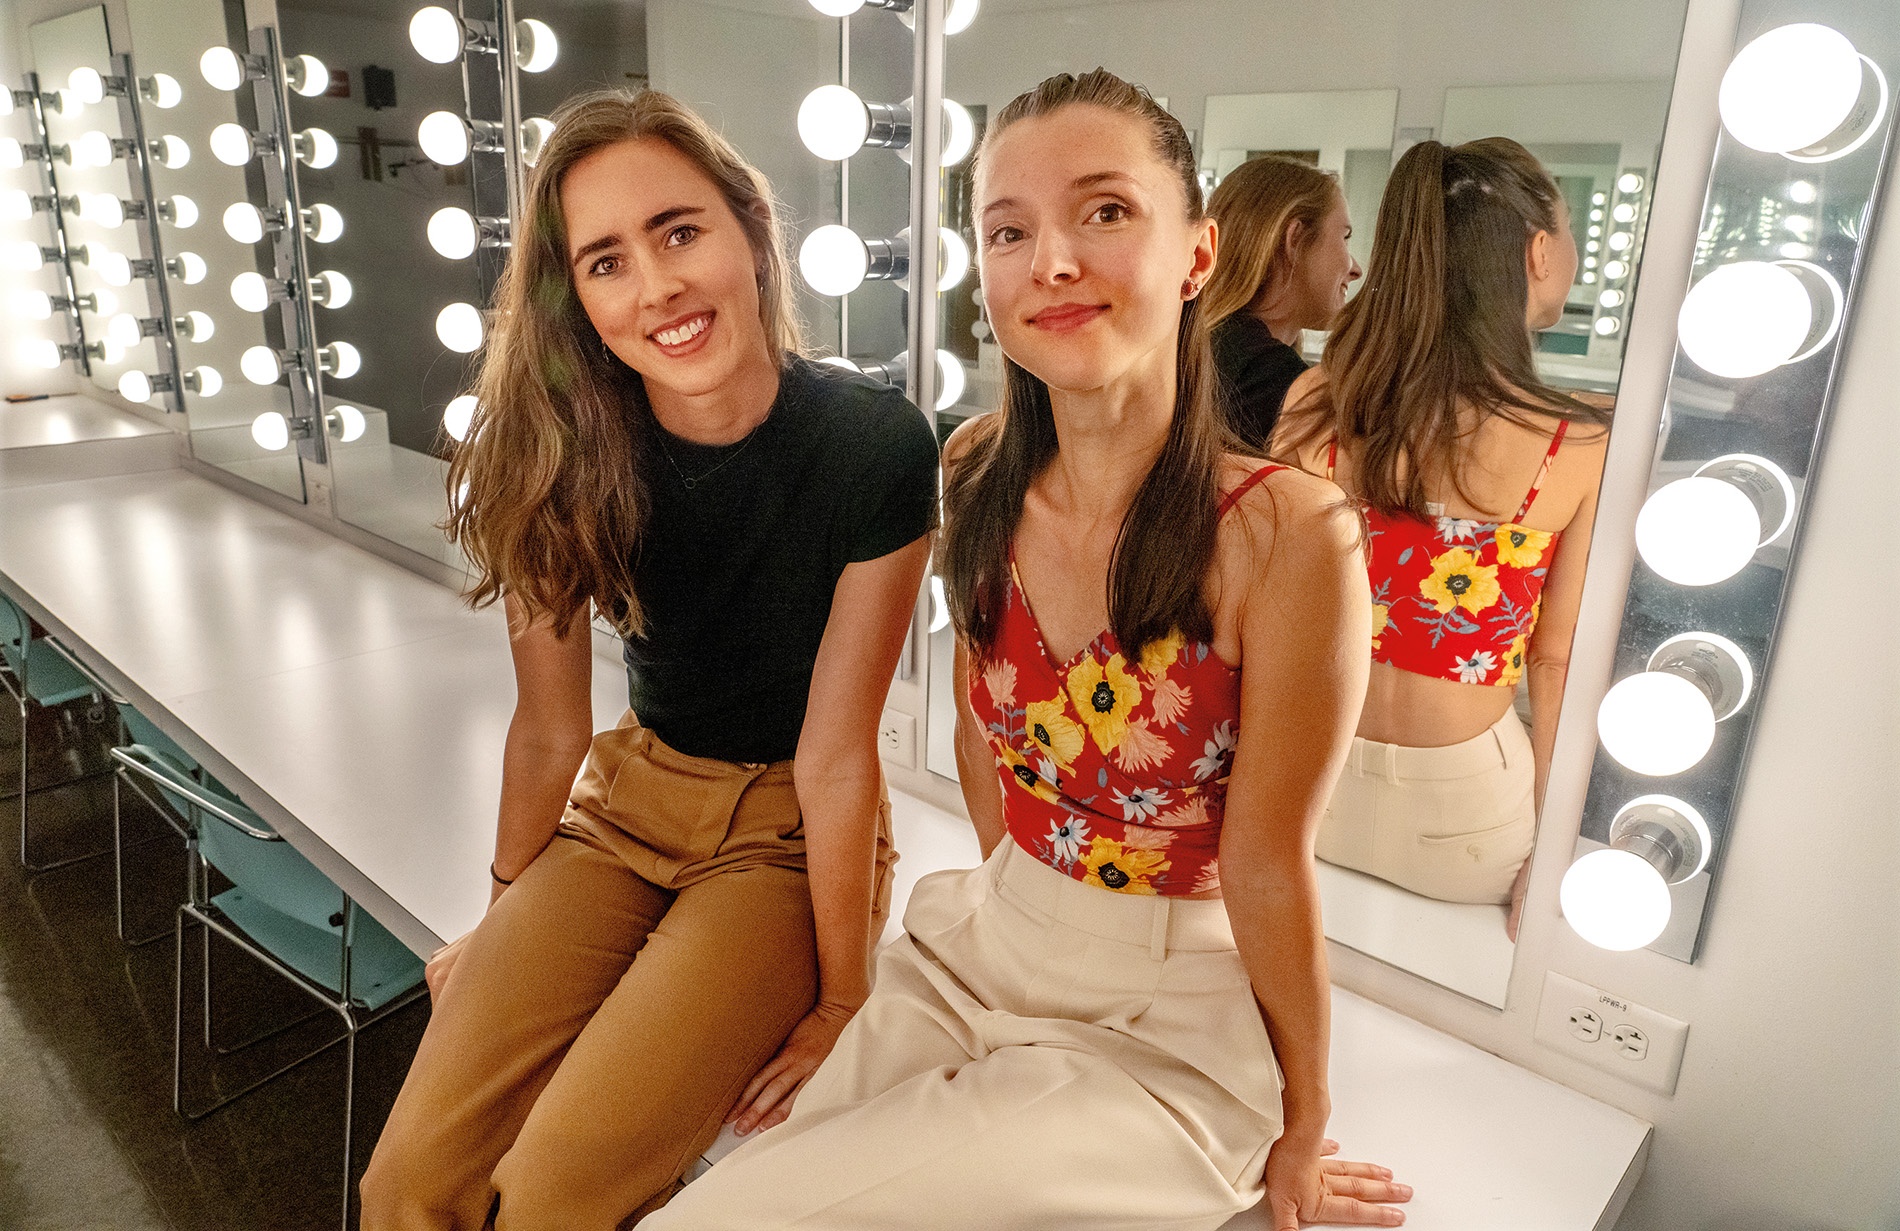 Image of Kayleigh Donowski and Eugenia Zinovieva sitting in front of a lighted mirror